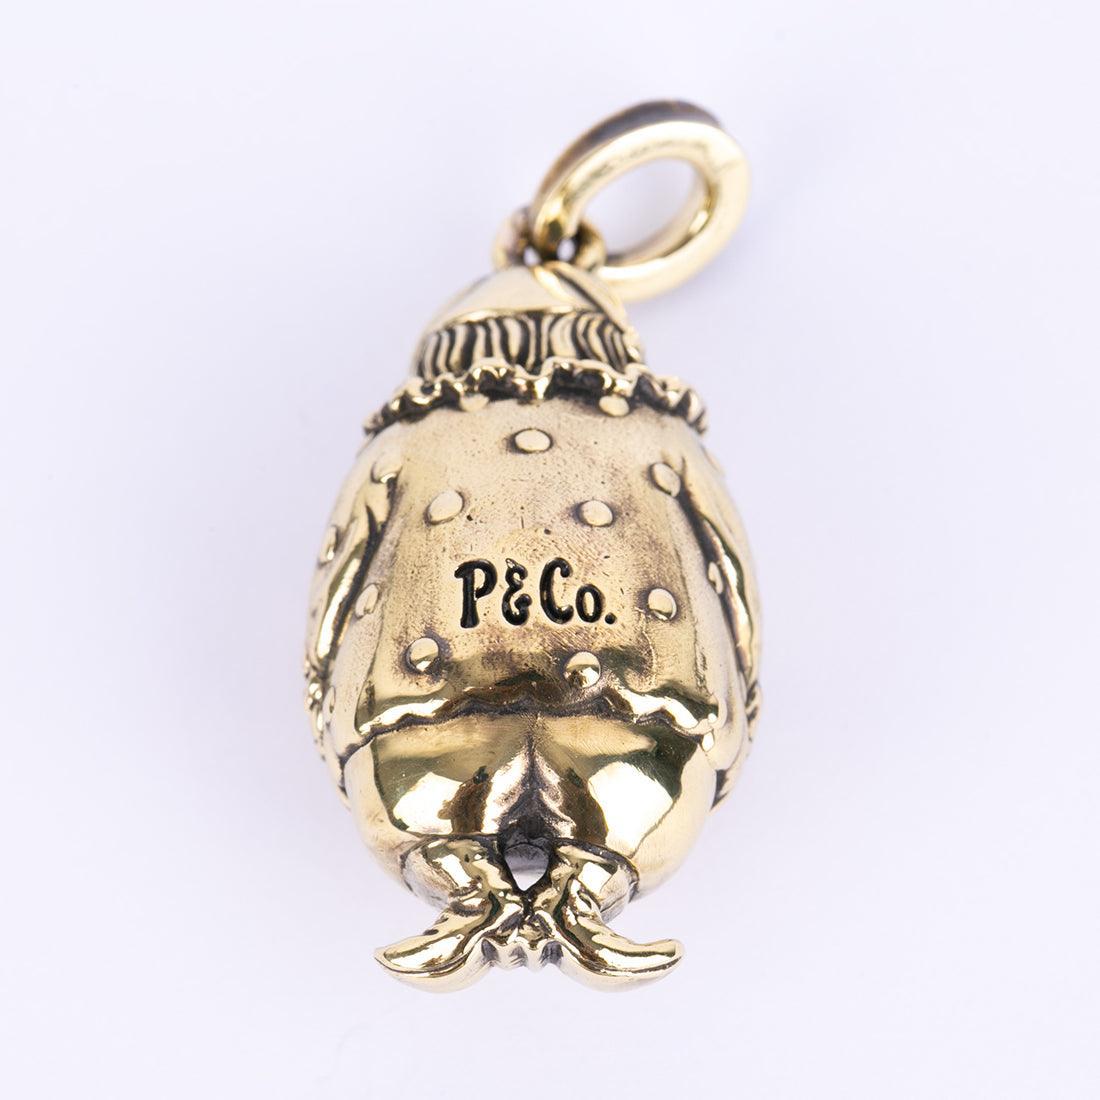 Image showing the Peanuts & Co YOU PAY MAN Key Holder - Brass which is a Others described by the following info Accessories, Others, Peanuts & Co, Released and sold on the IRON HEART GERMANY online store